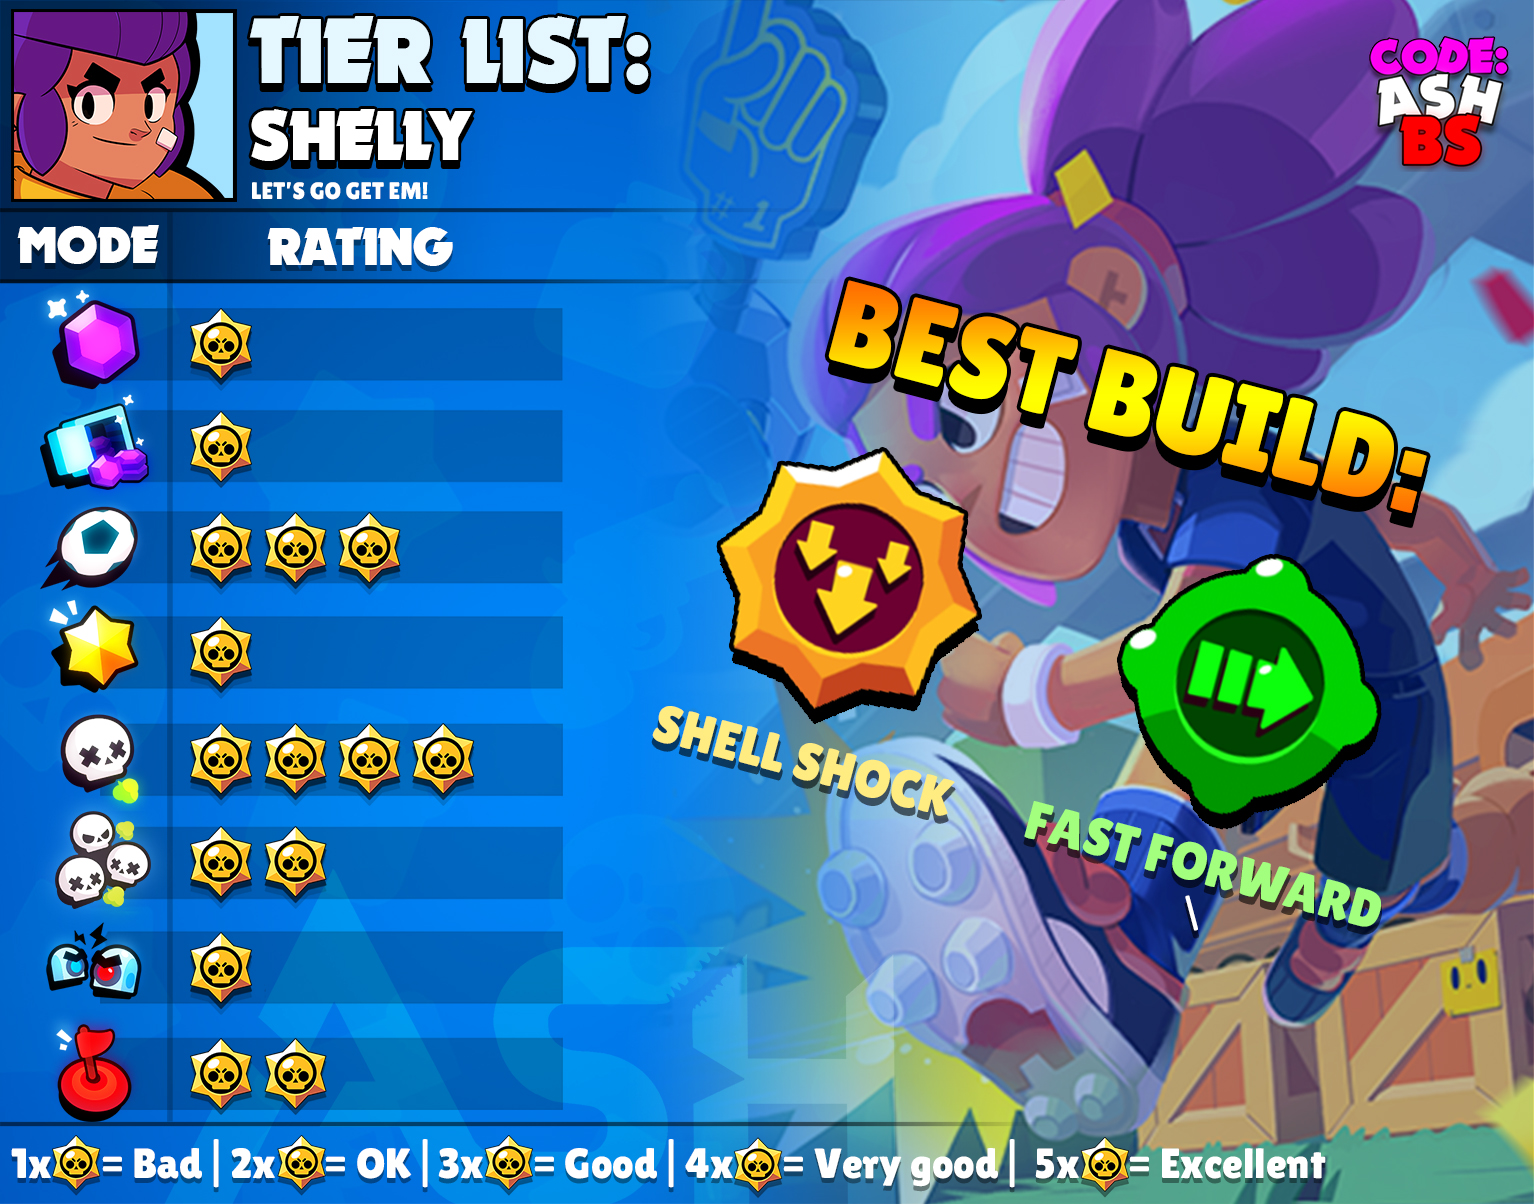 Uzivatel Code Ashbs Na Twitteru Shelly Tier List For All Game Modes And The Best Maps To Use Her In With Suggested Comps Underpowered Brawler At The Top Stage Of The Game - tuto brawl stars shelly